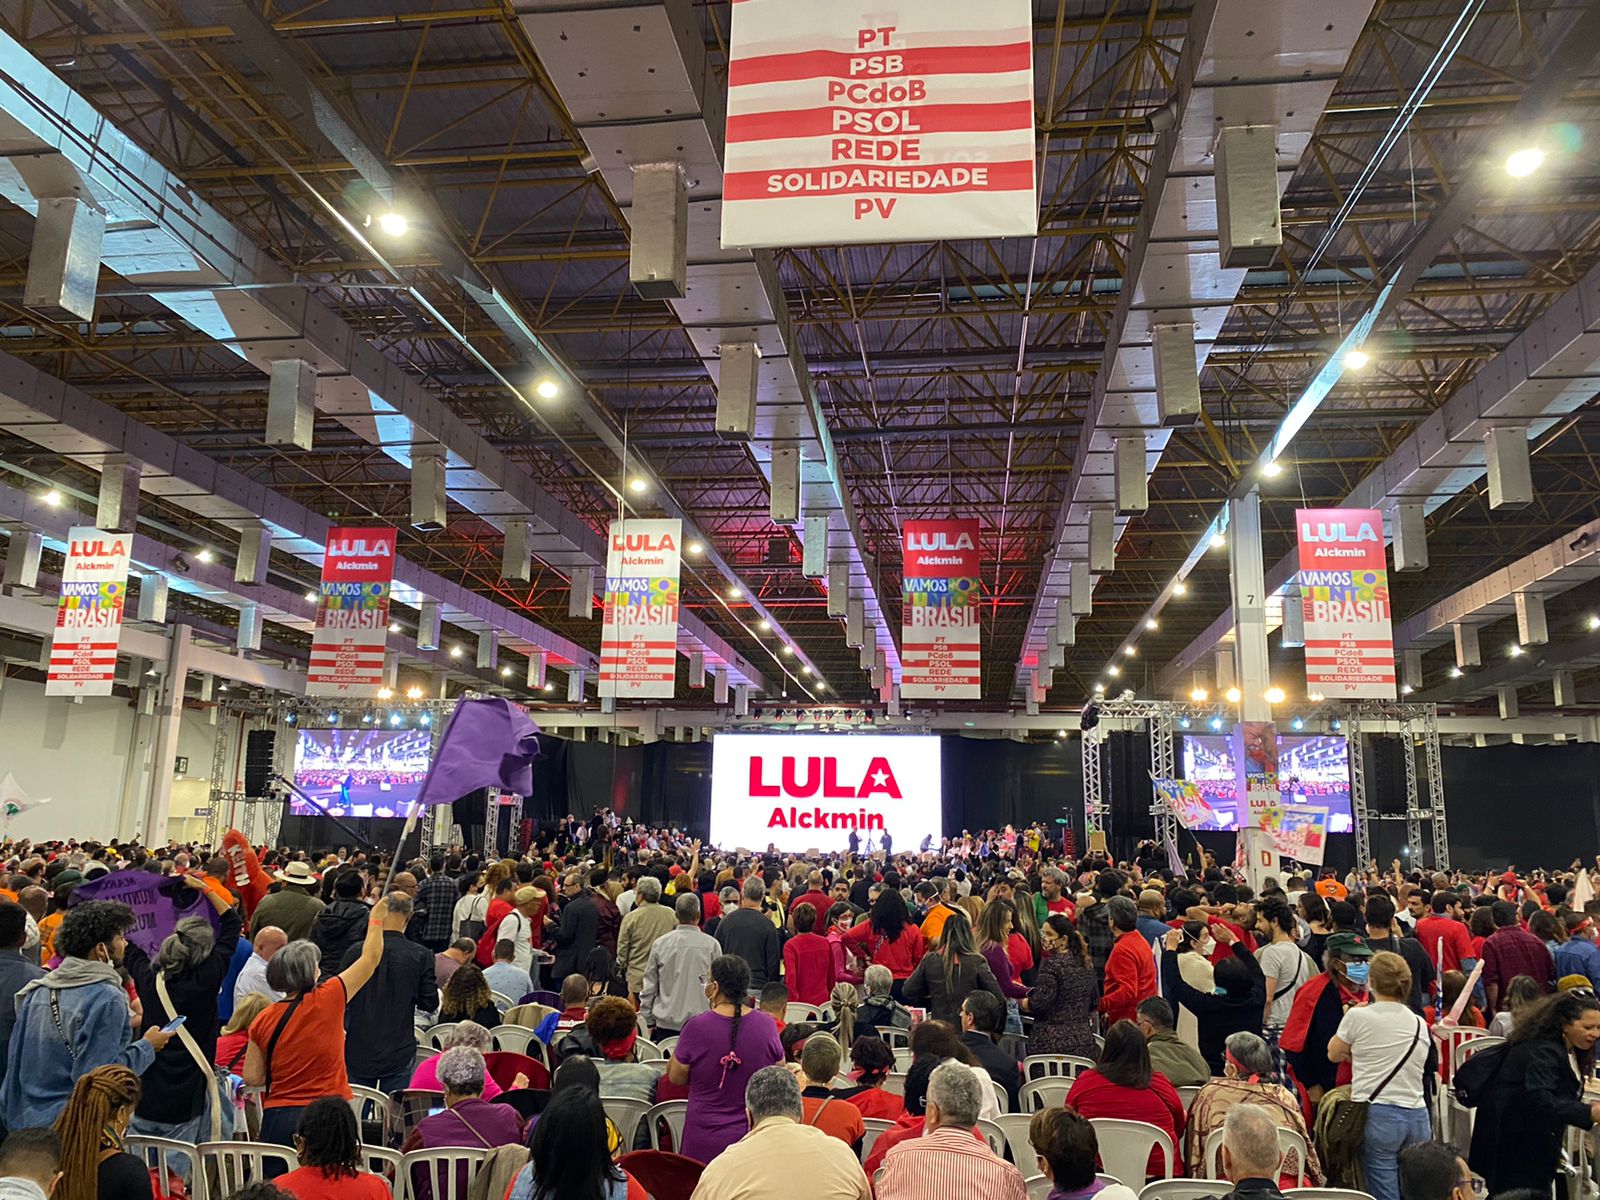 Launch of Lula's candidacy in São Paulo